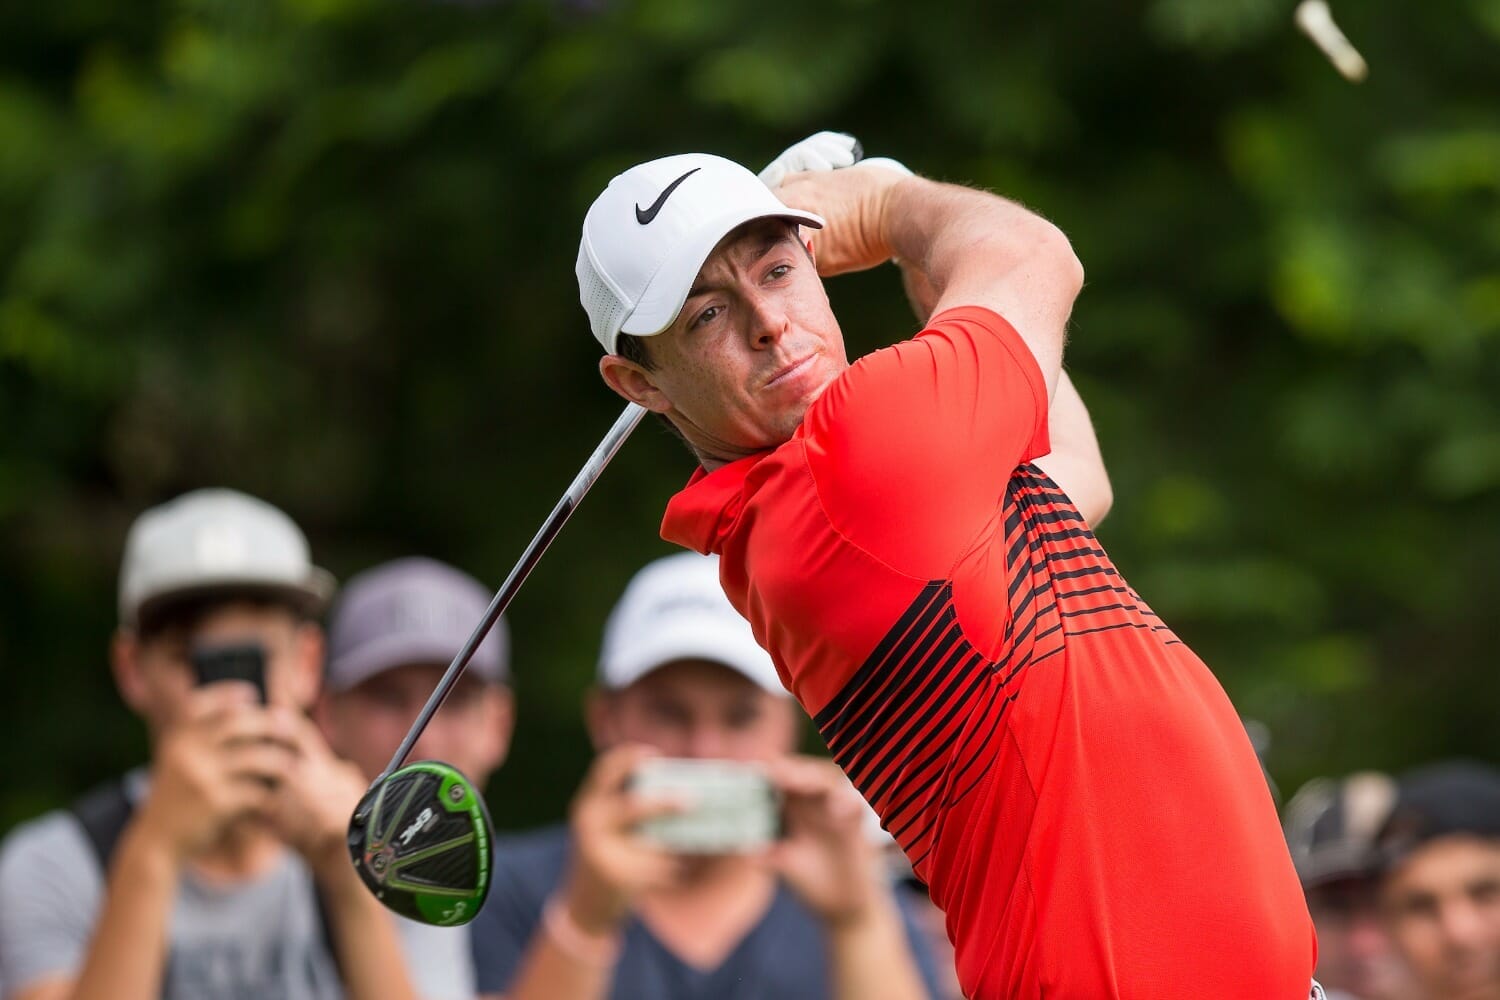 Rory returns to action at WGC in Mexico City